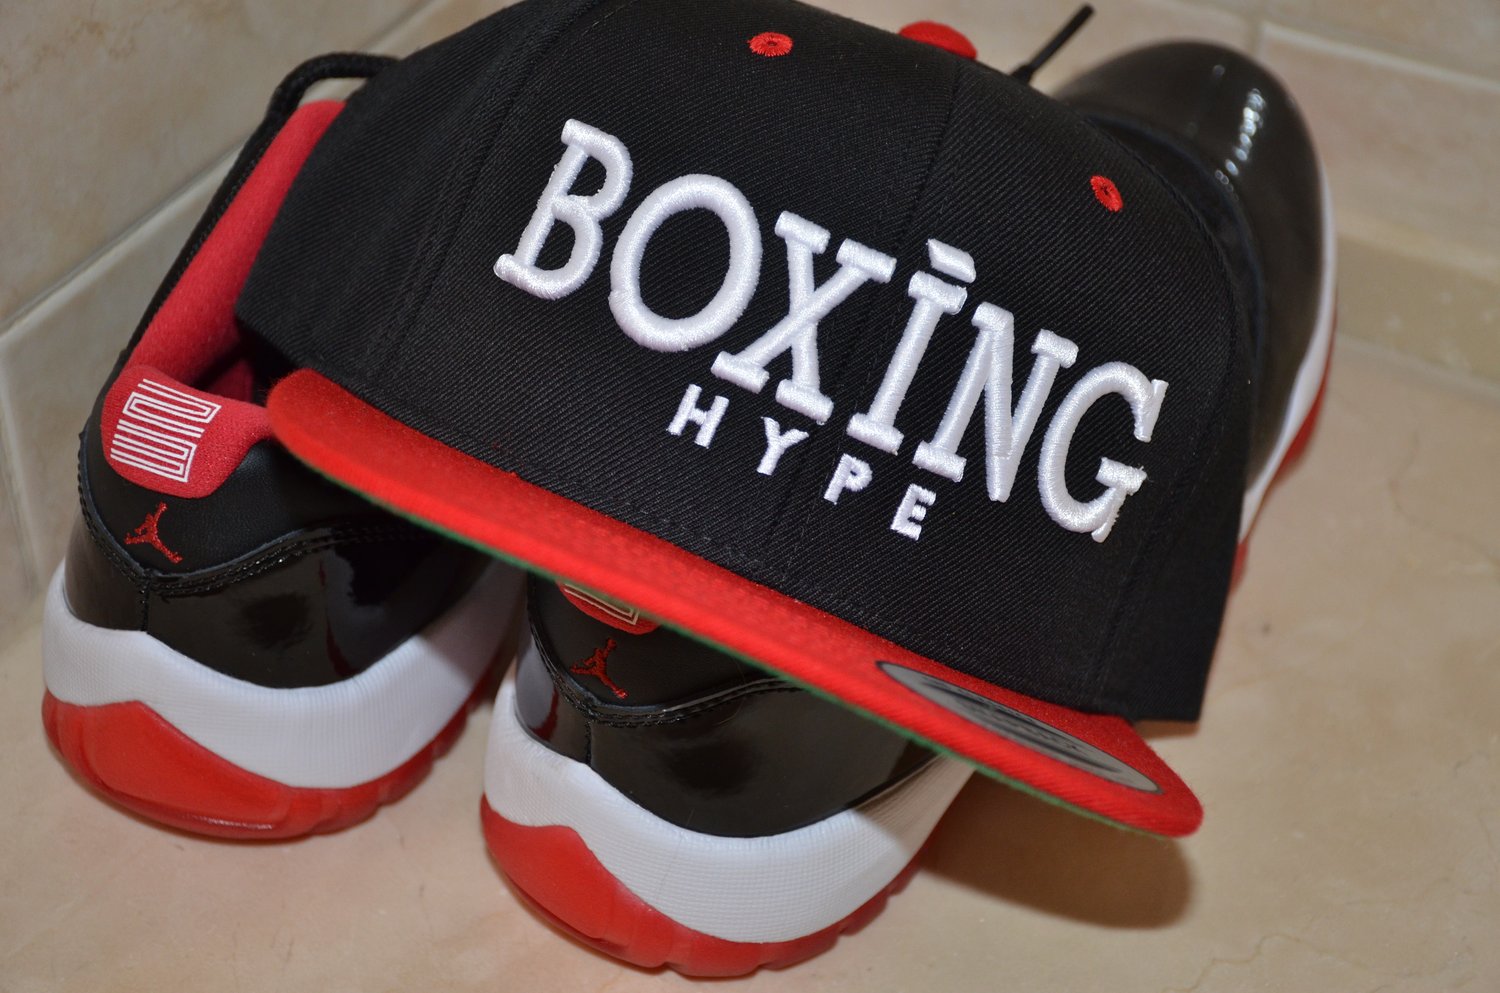 Image of Black BoxingHype muscle tees